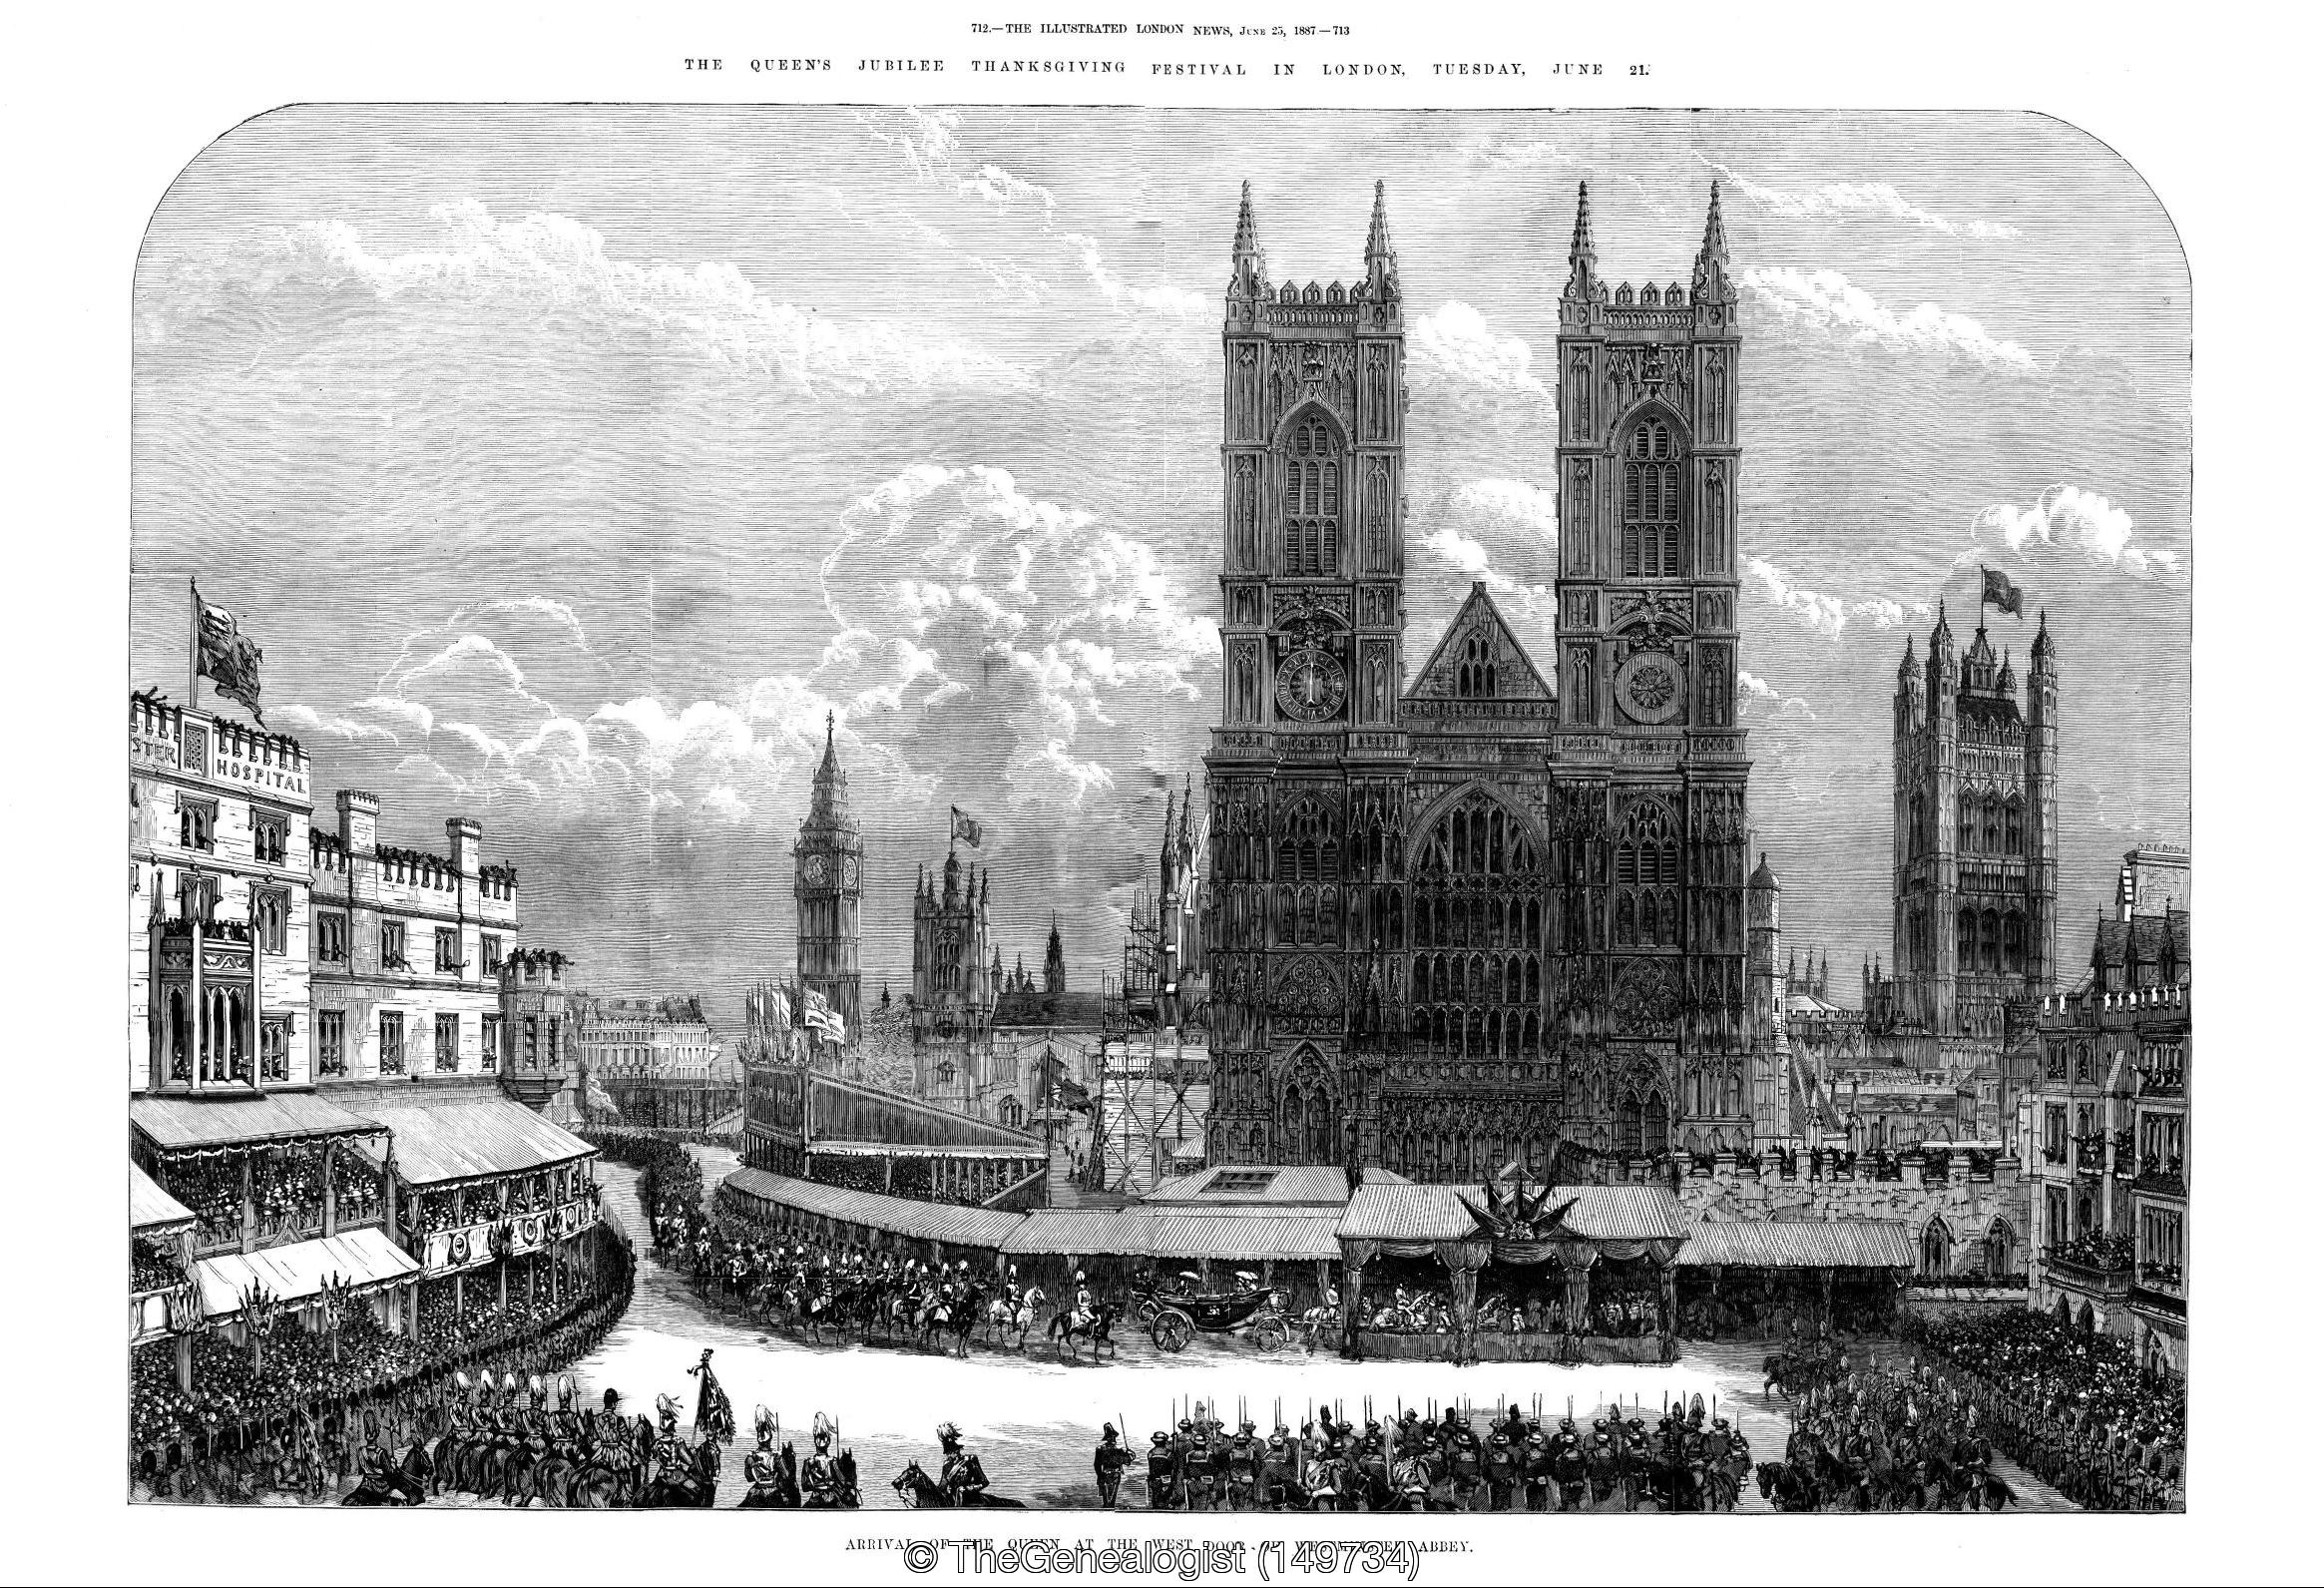 Westminster Abbey was the setting for Queen Victoria's Golden Jubilee Thanksgiving Service in 1887